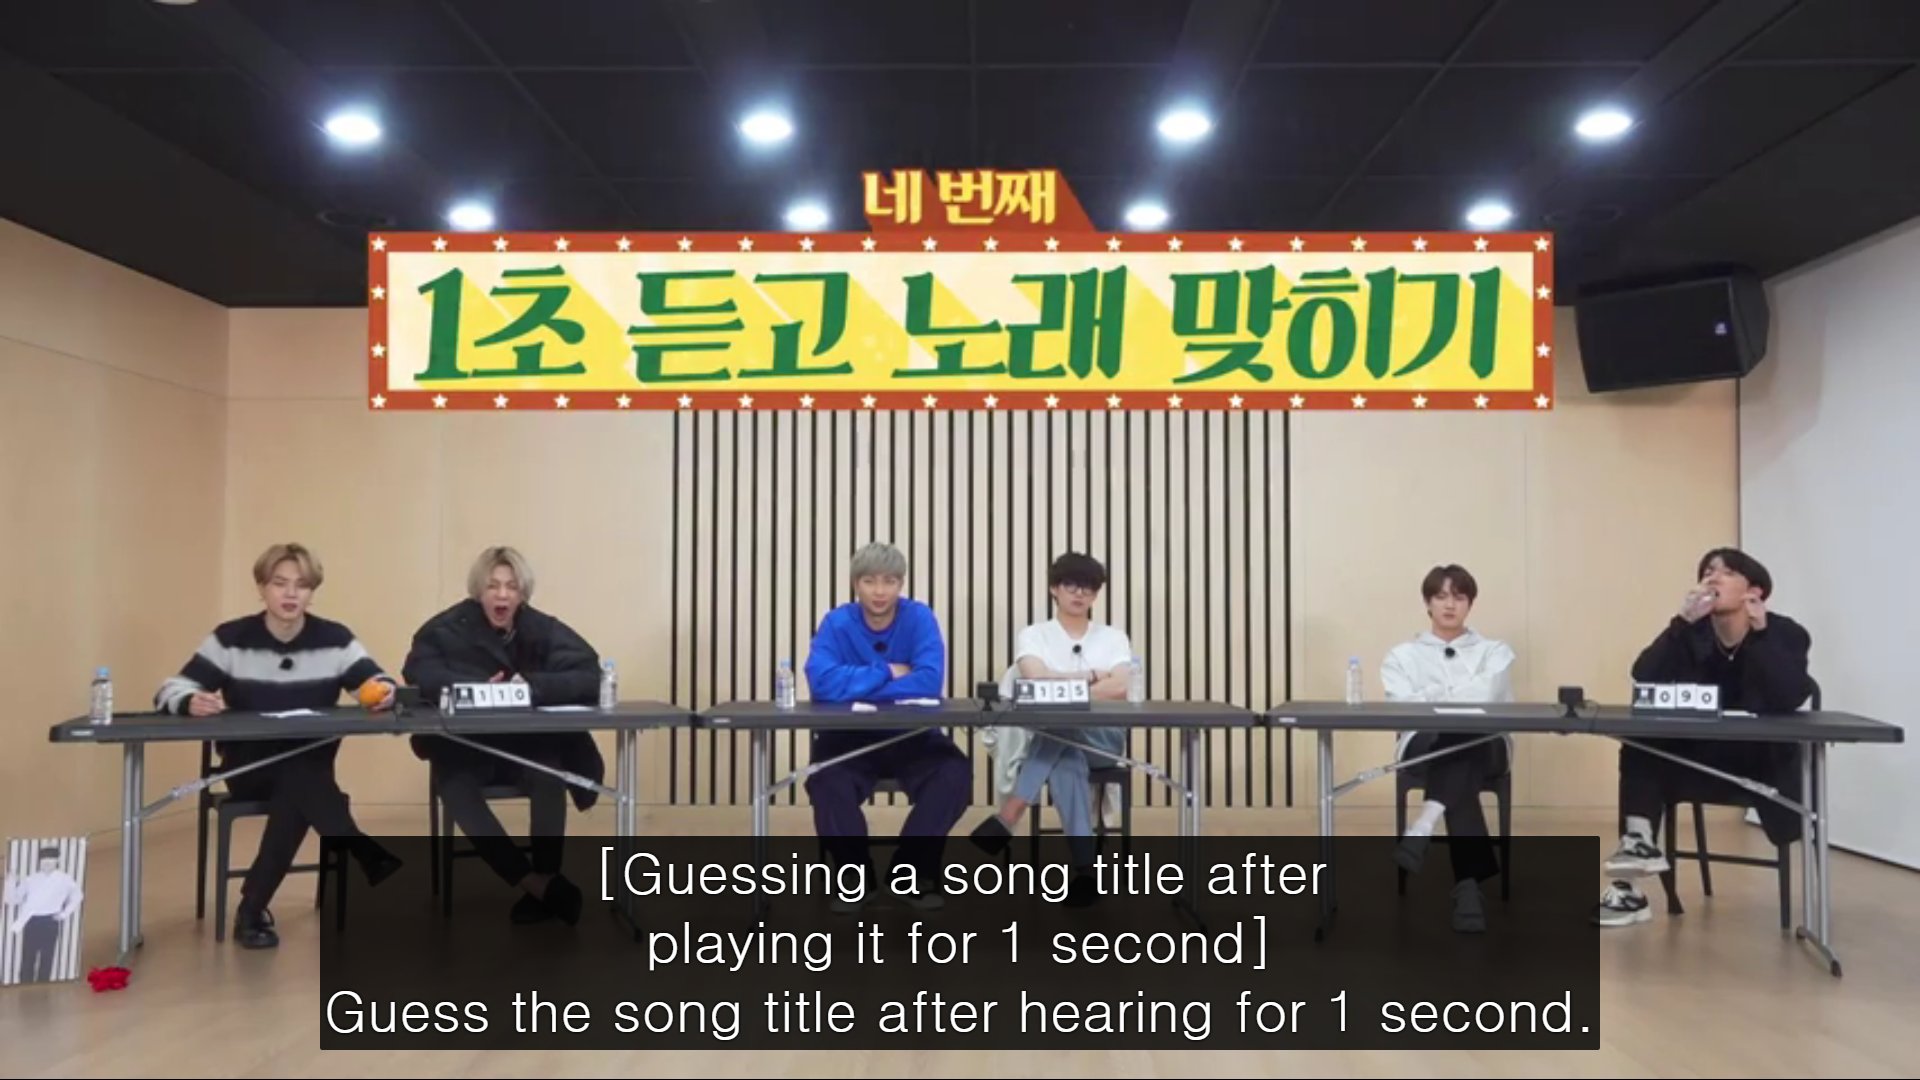 Fir on Twitter: "hobi is heechul is so good with a song after playing it for 1 second if you watch Knowing he did so well! https://t.co/NFWeiPxbV0" /